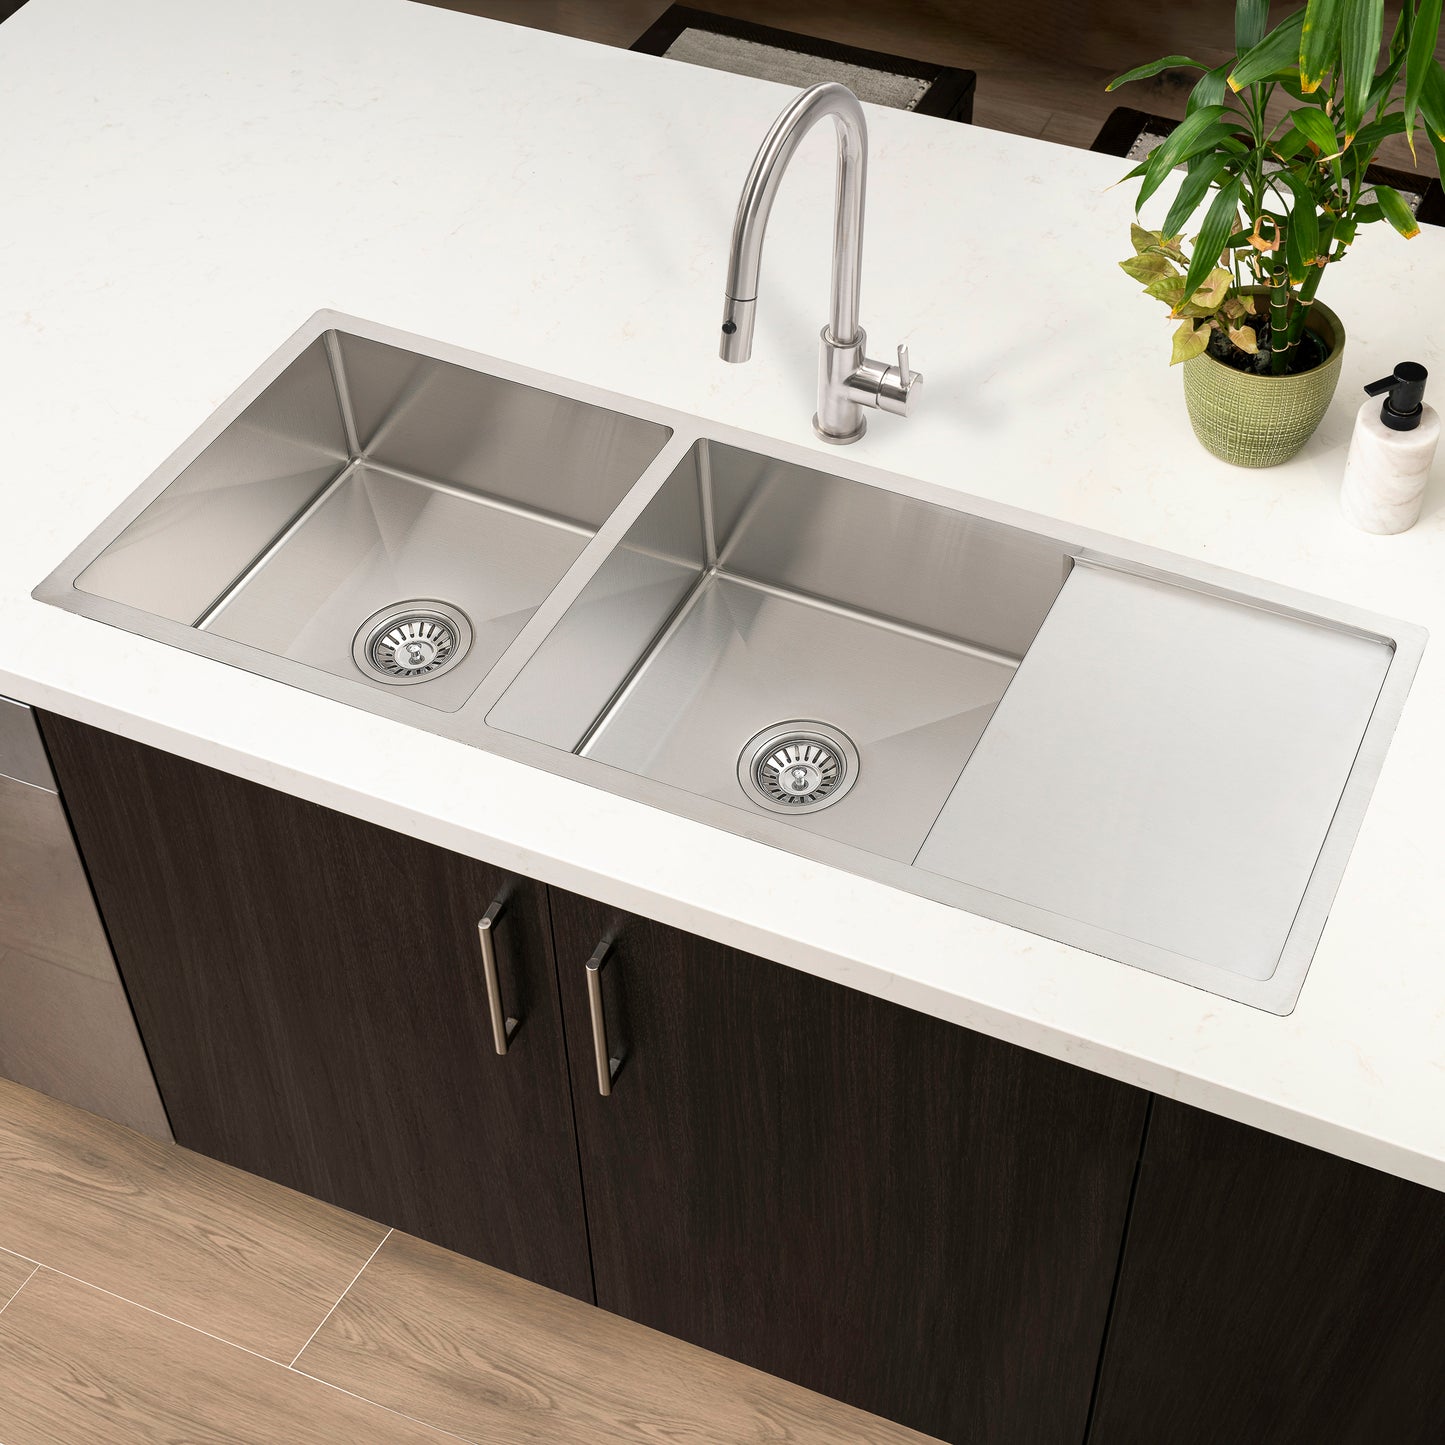 Retto II 1190mm x 450mm x 230mm Stainless Steel Double Sink with Drainer, Brushed Nickel Silver